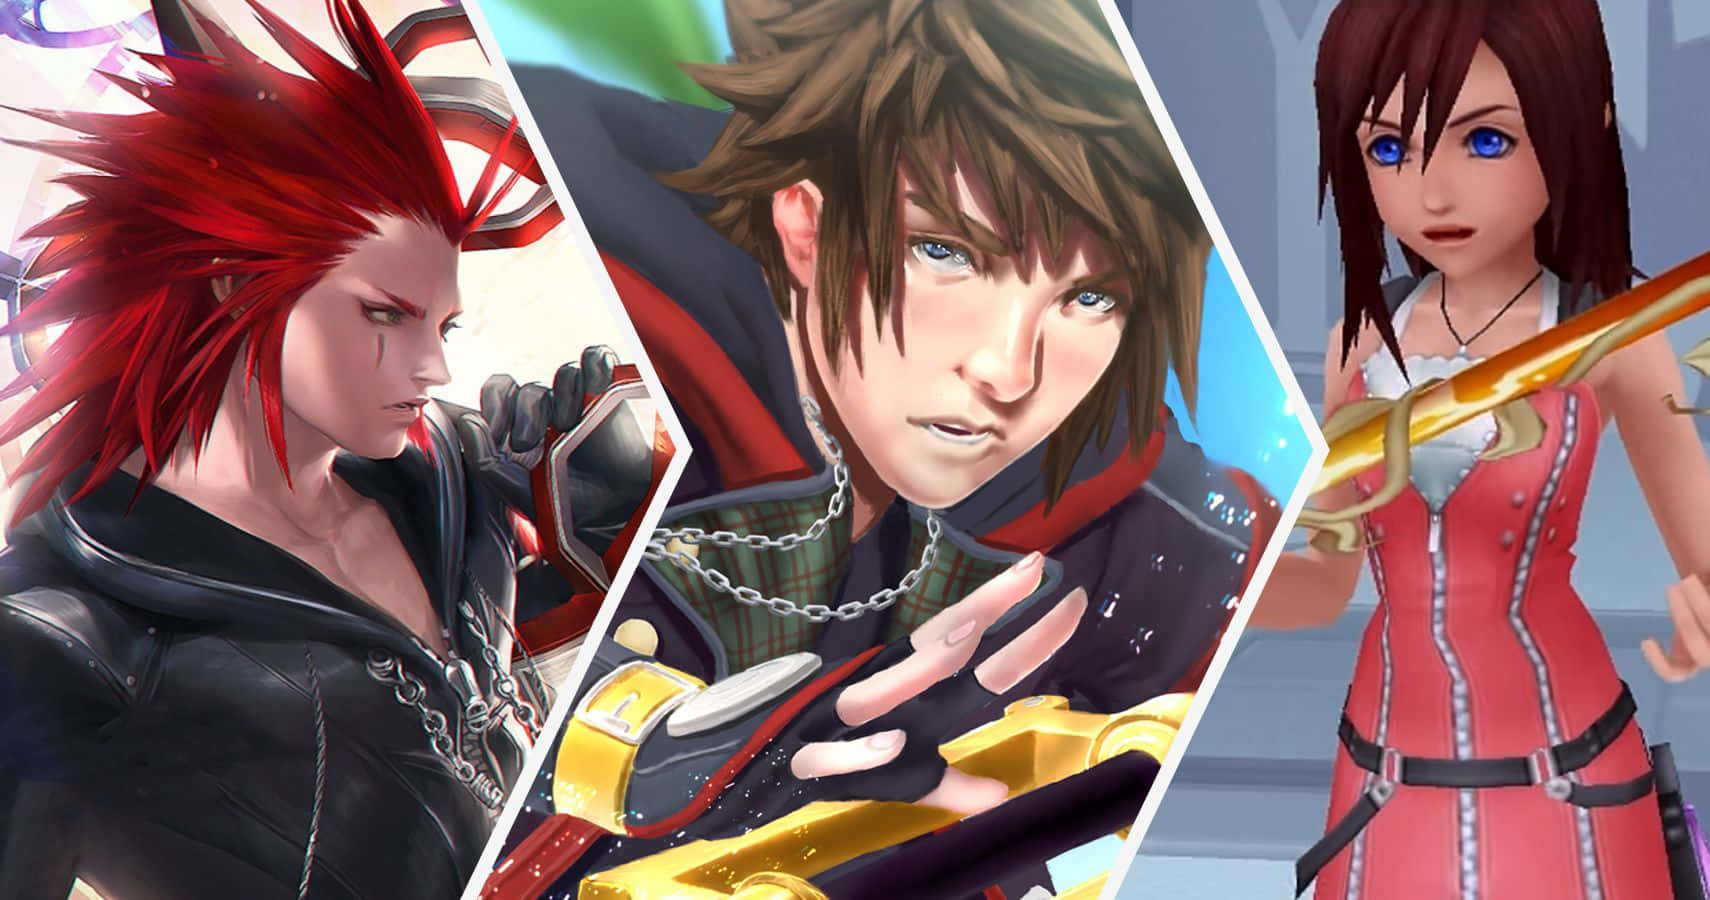 A Stunning Lineup of Kingdom Hearts Characters Wallpaper